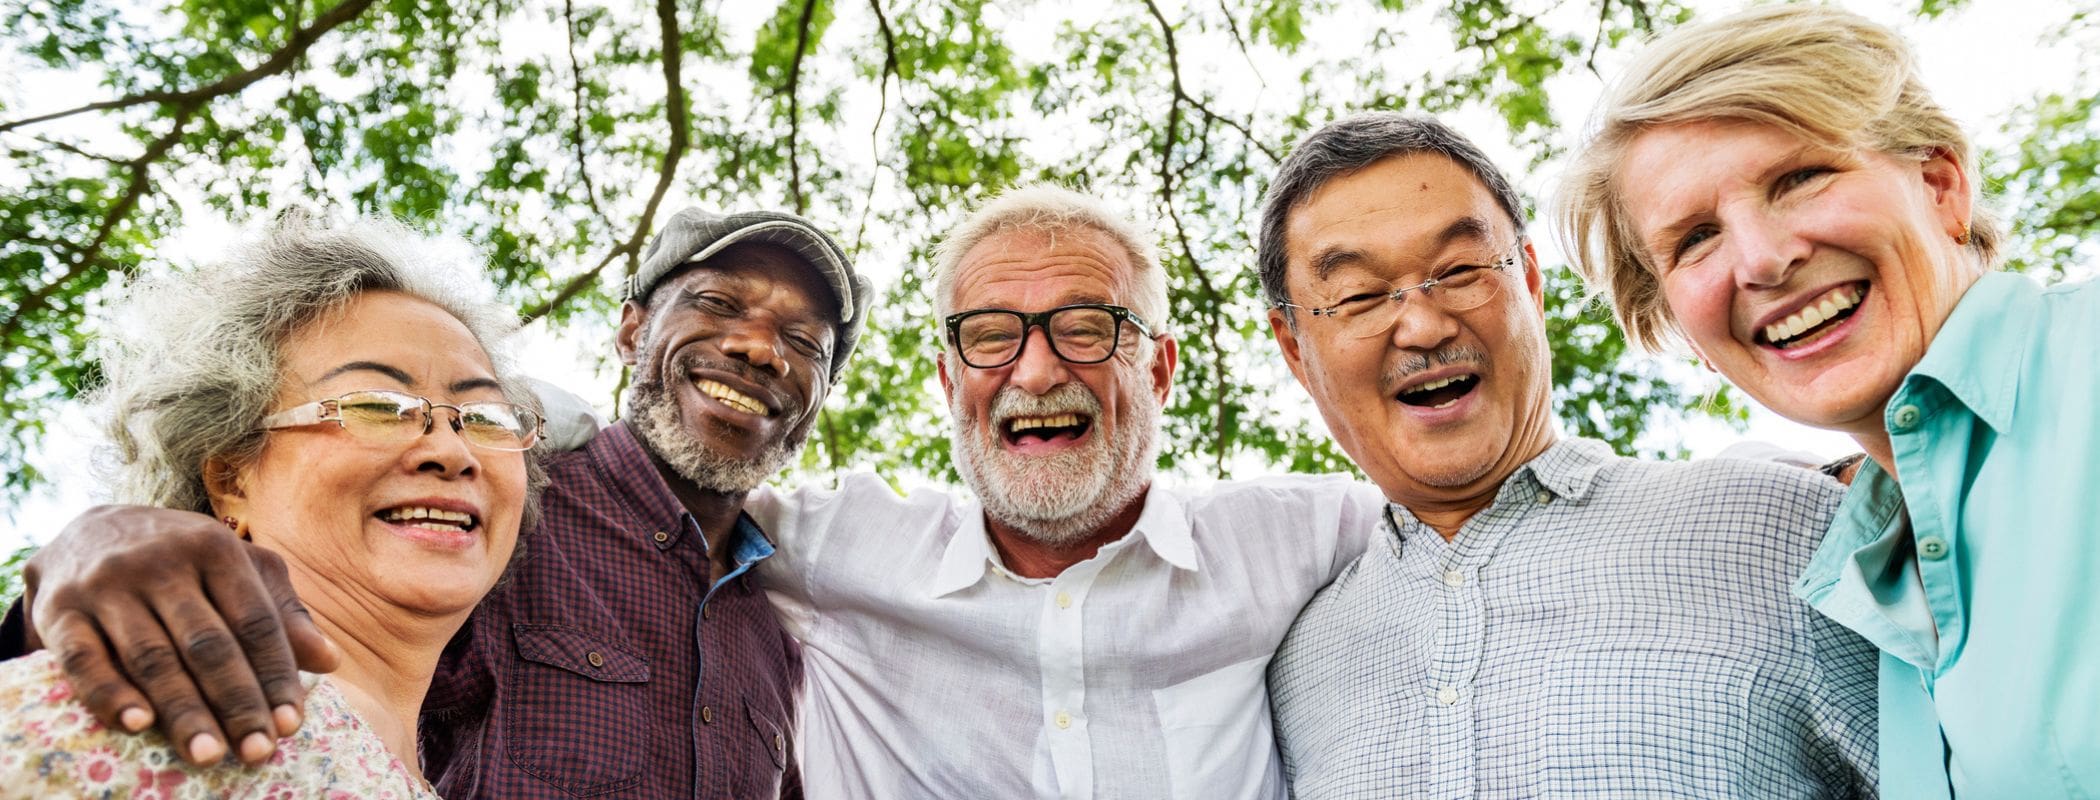 Group of happy old age people